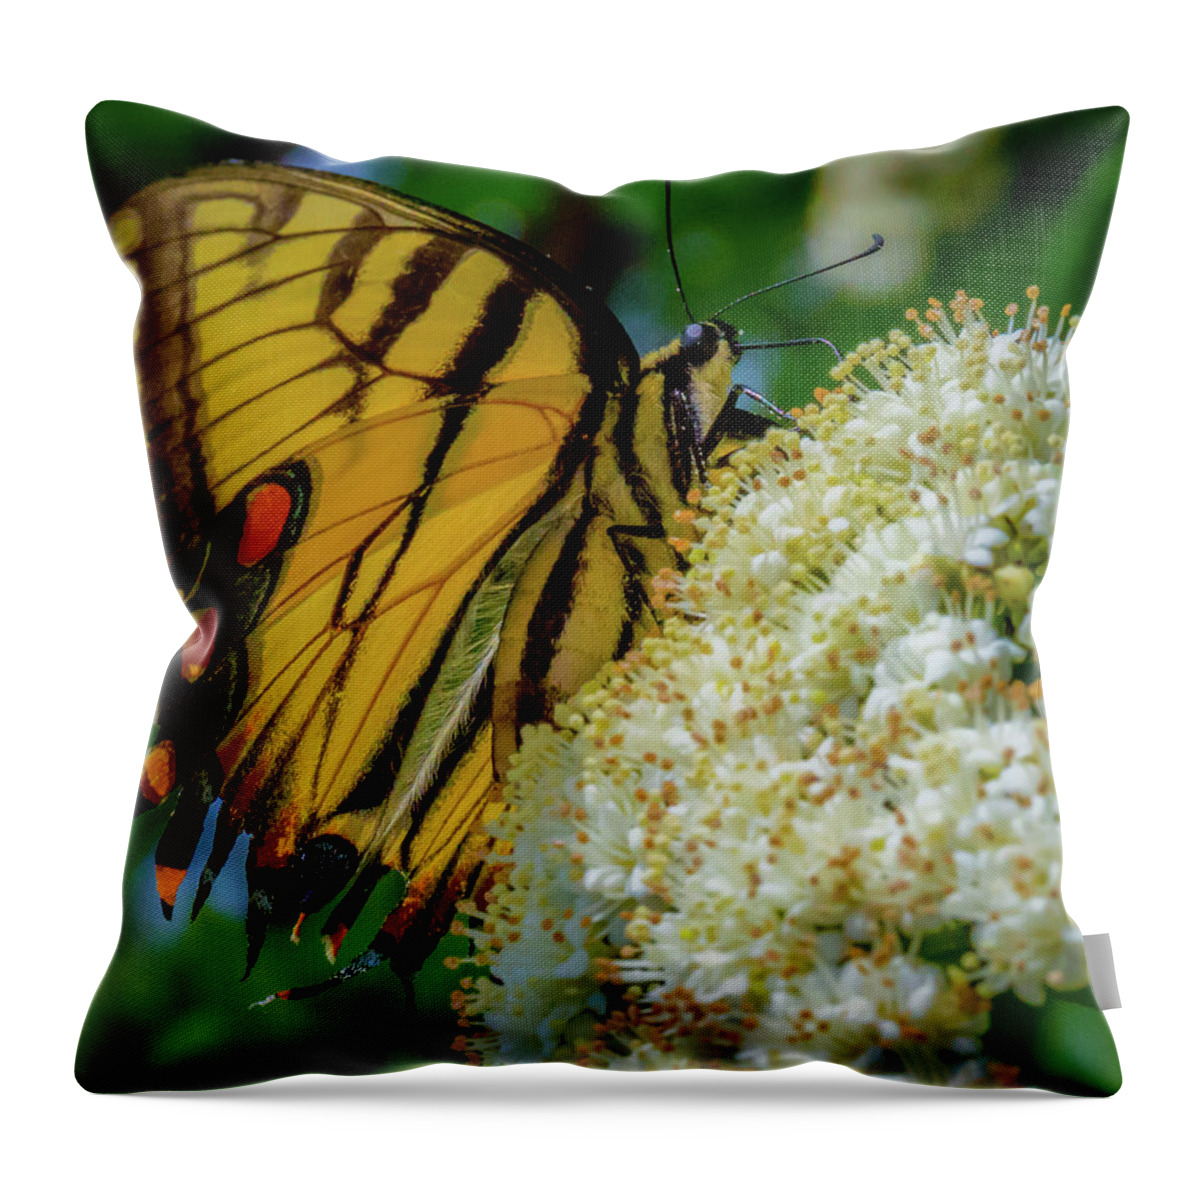 Butterfly Throw Pillow featuring the photograph Manassas Butterfly by Lora J Wilson